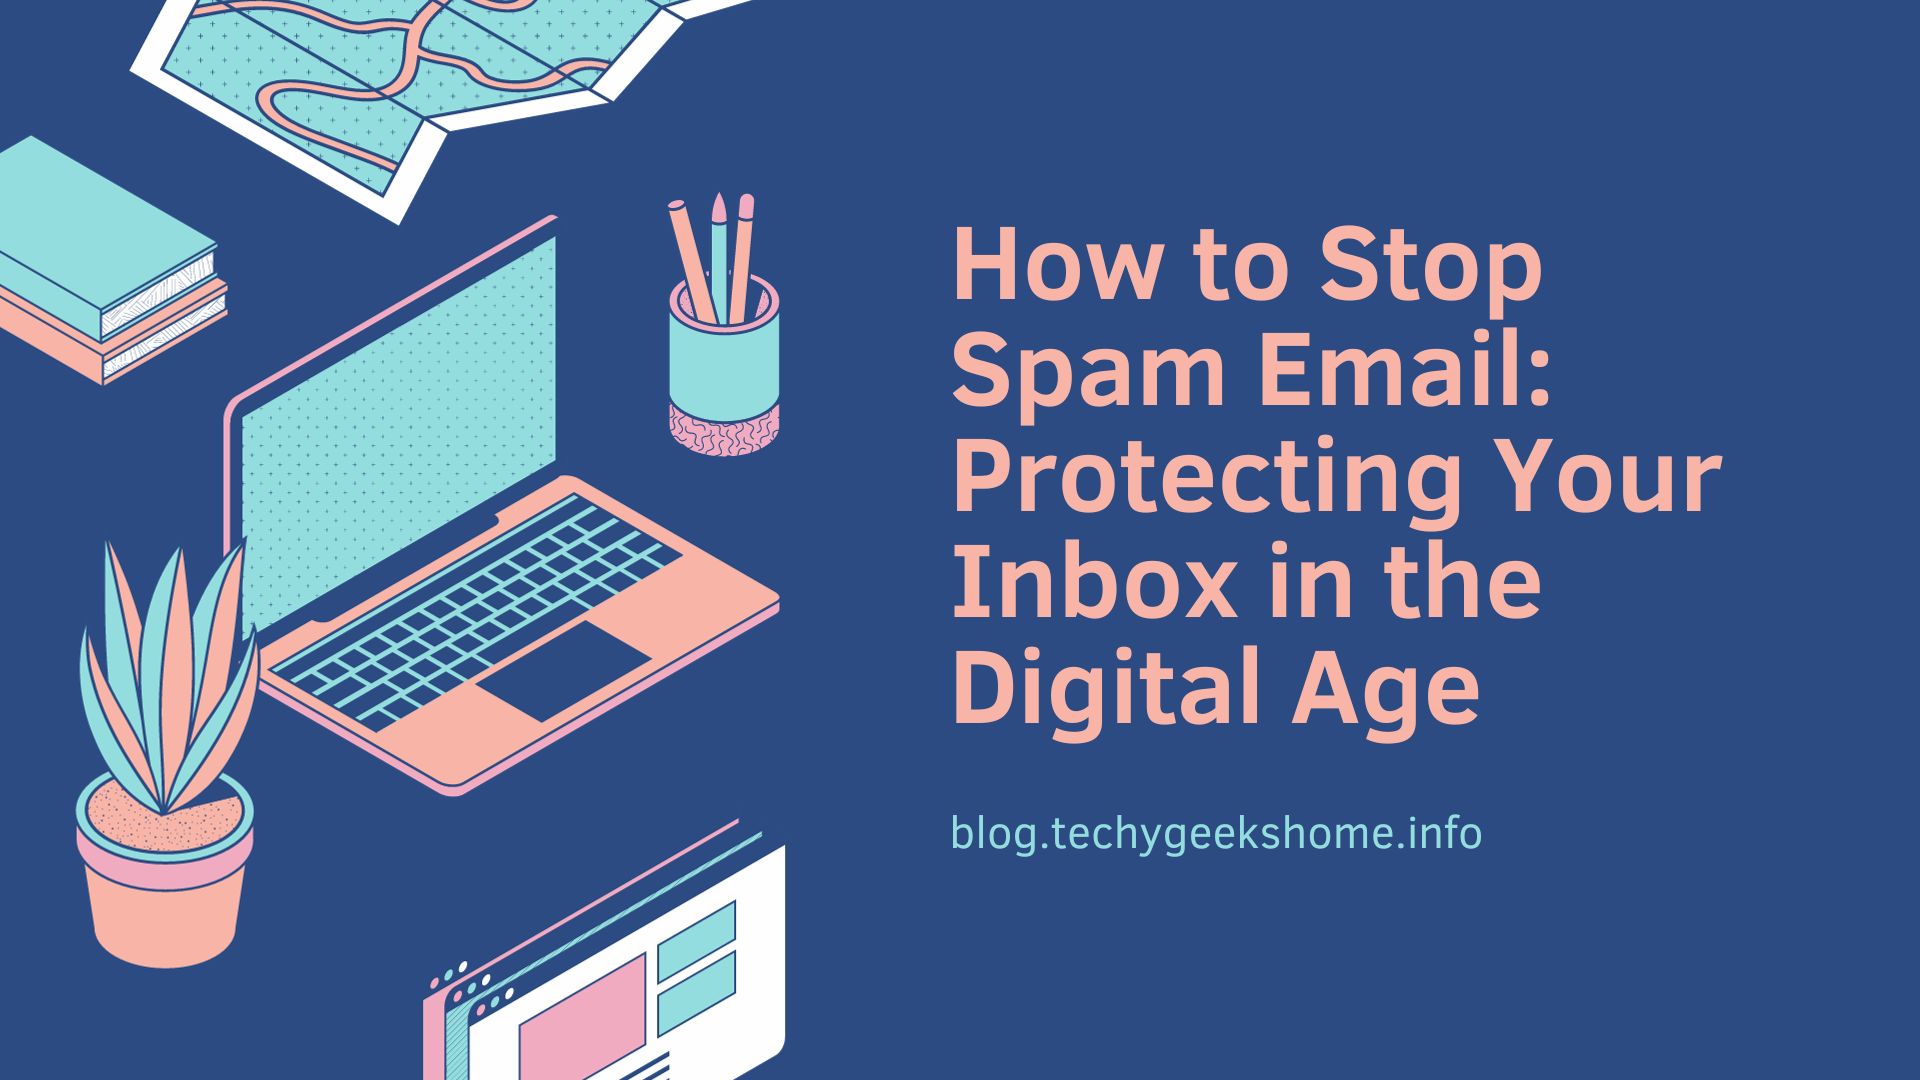 How to Stop Spam Email Protecting Your Inbox in the Digital Age